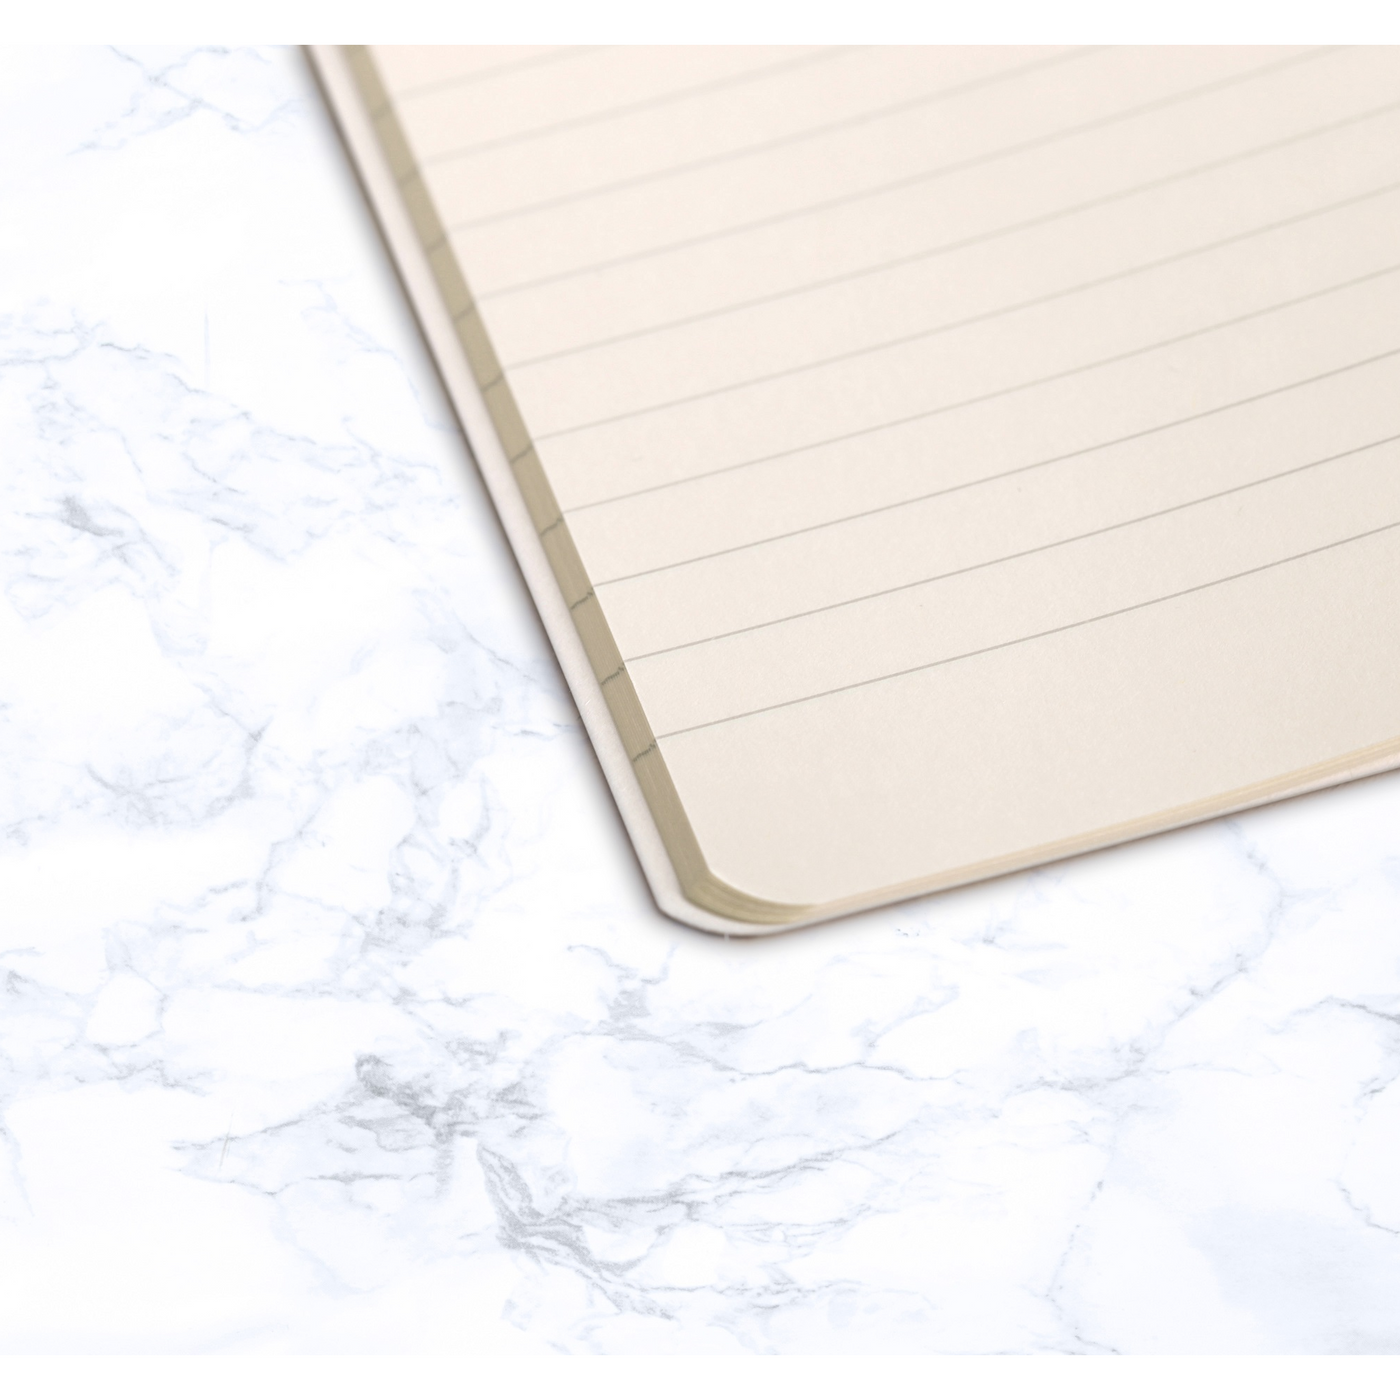 Clairefontaine Neo Deco Sewn Spine Notebook - Ivory Paper - Lined 48 Sheets - 6 x 8 1/4 - Shell | Atlas Stationers.